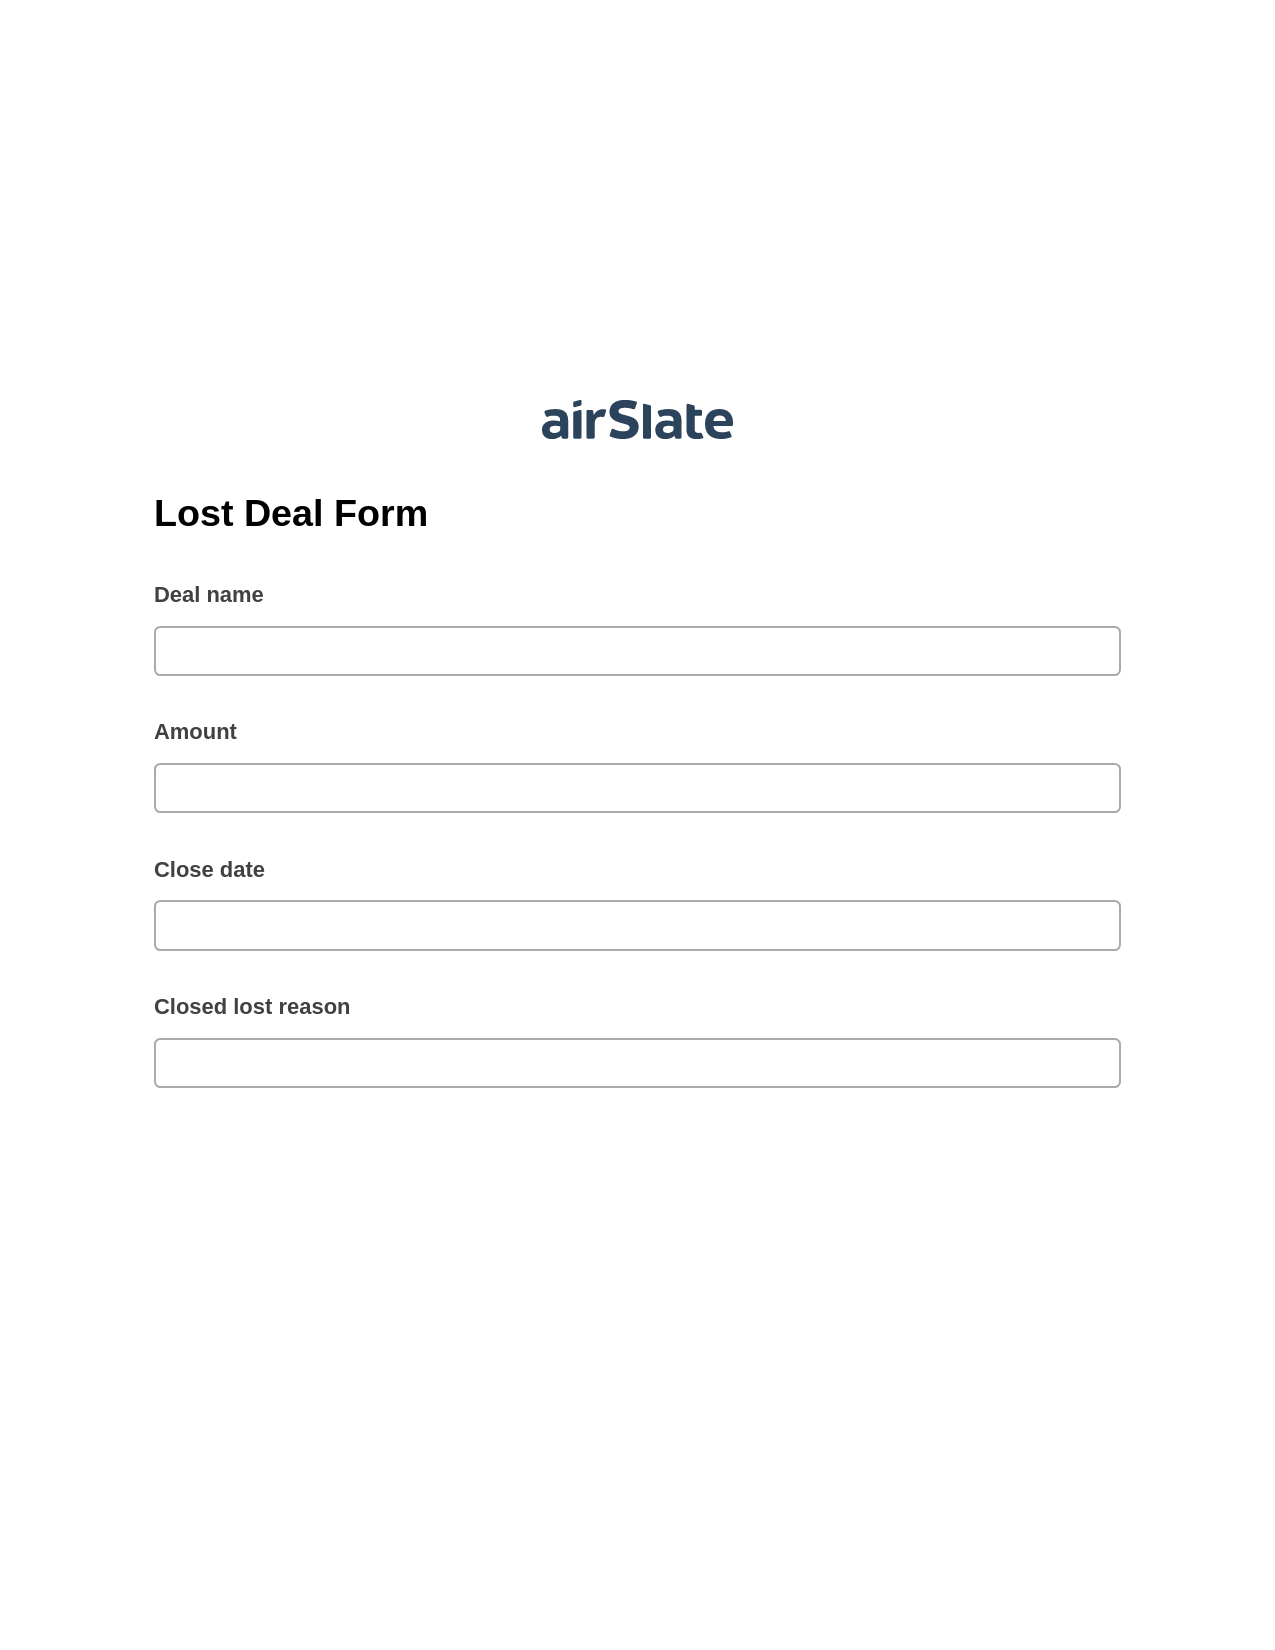 Lost Deal Form Pre-fill Document Bot, Add Tags to Slate Bot, Export to Excel 365 Bot